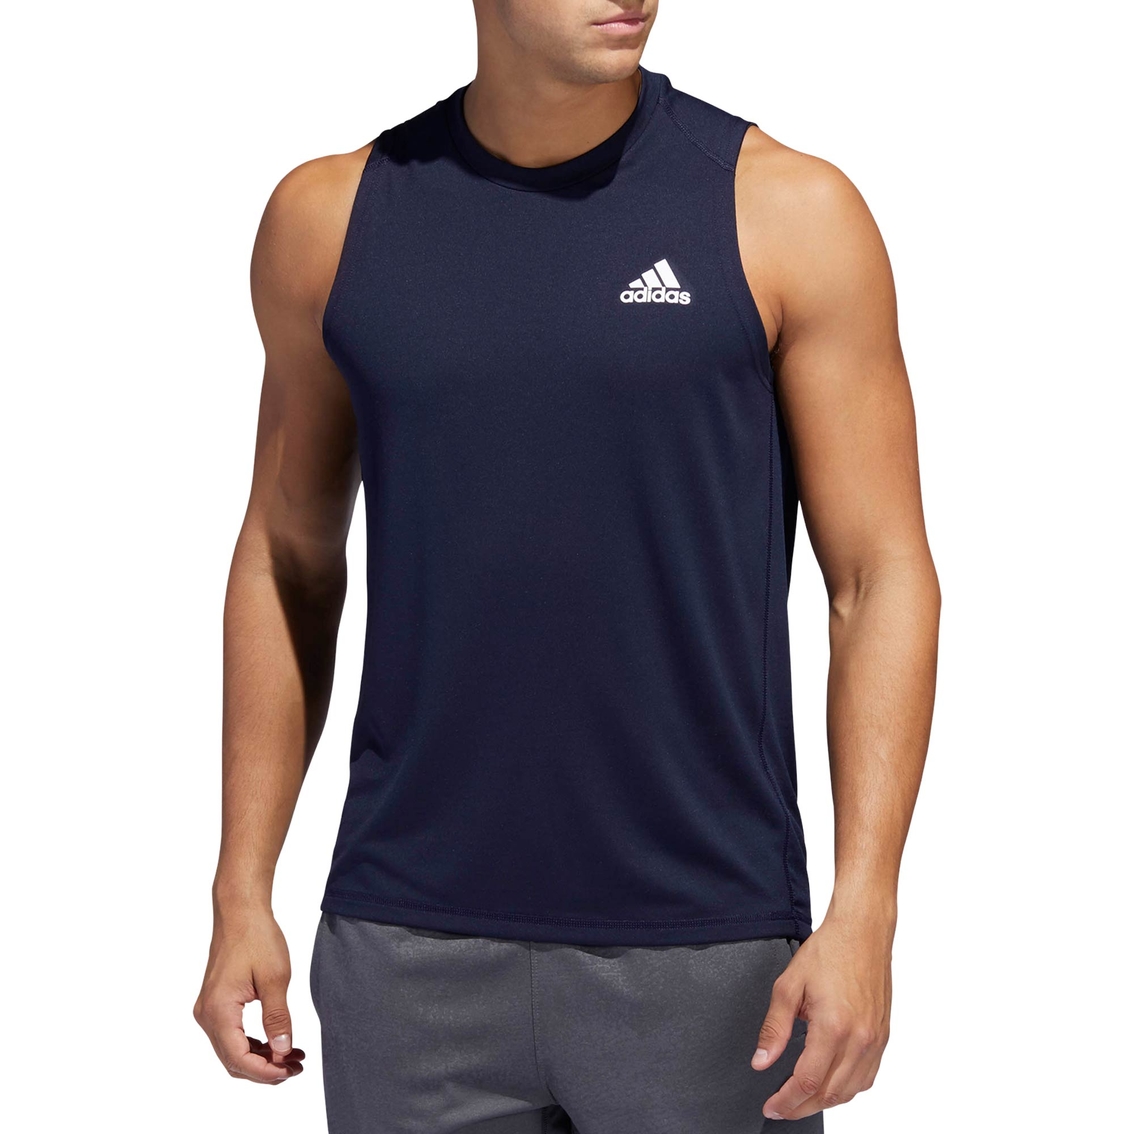 Adidas Freelift Muscle Tee | Shirts | Apparel | Shop The Exchange